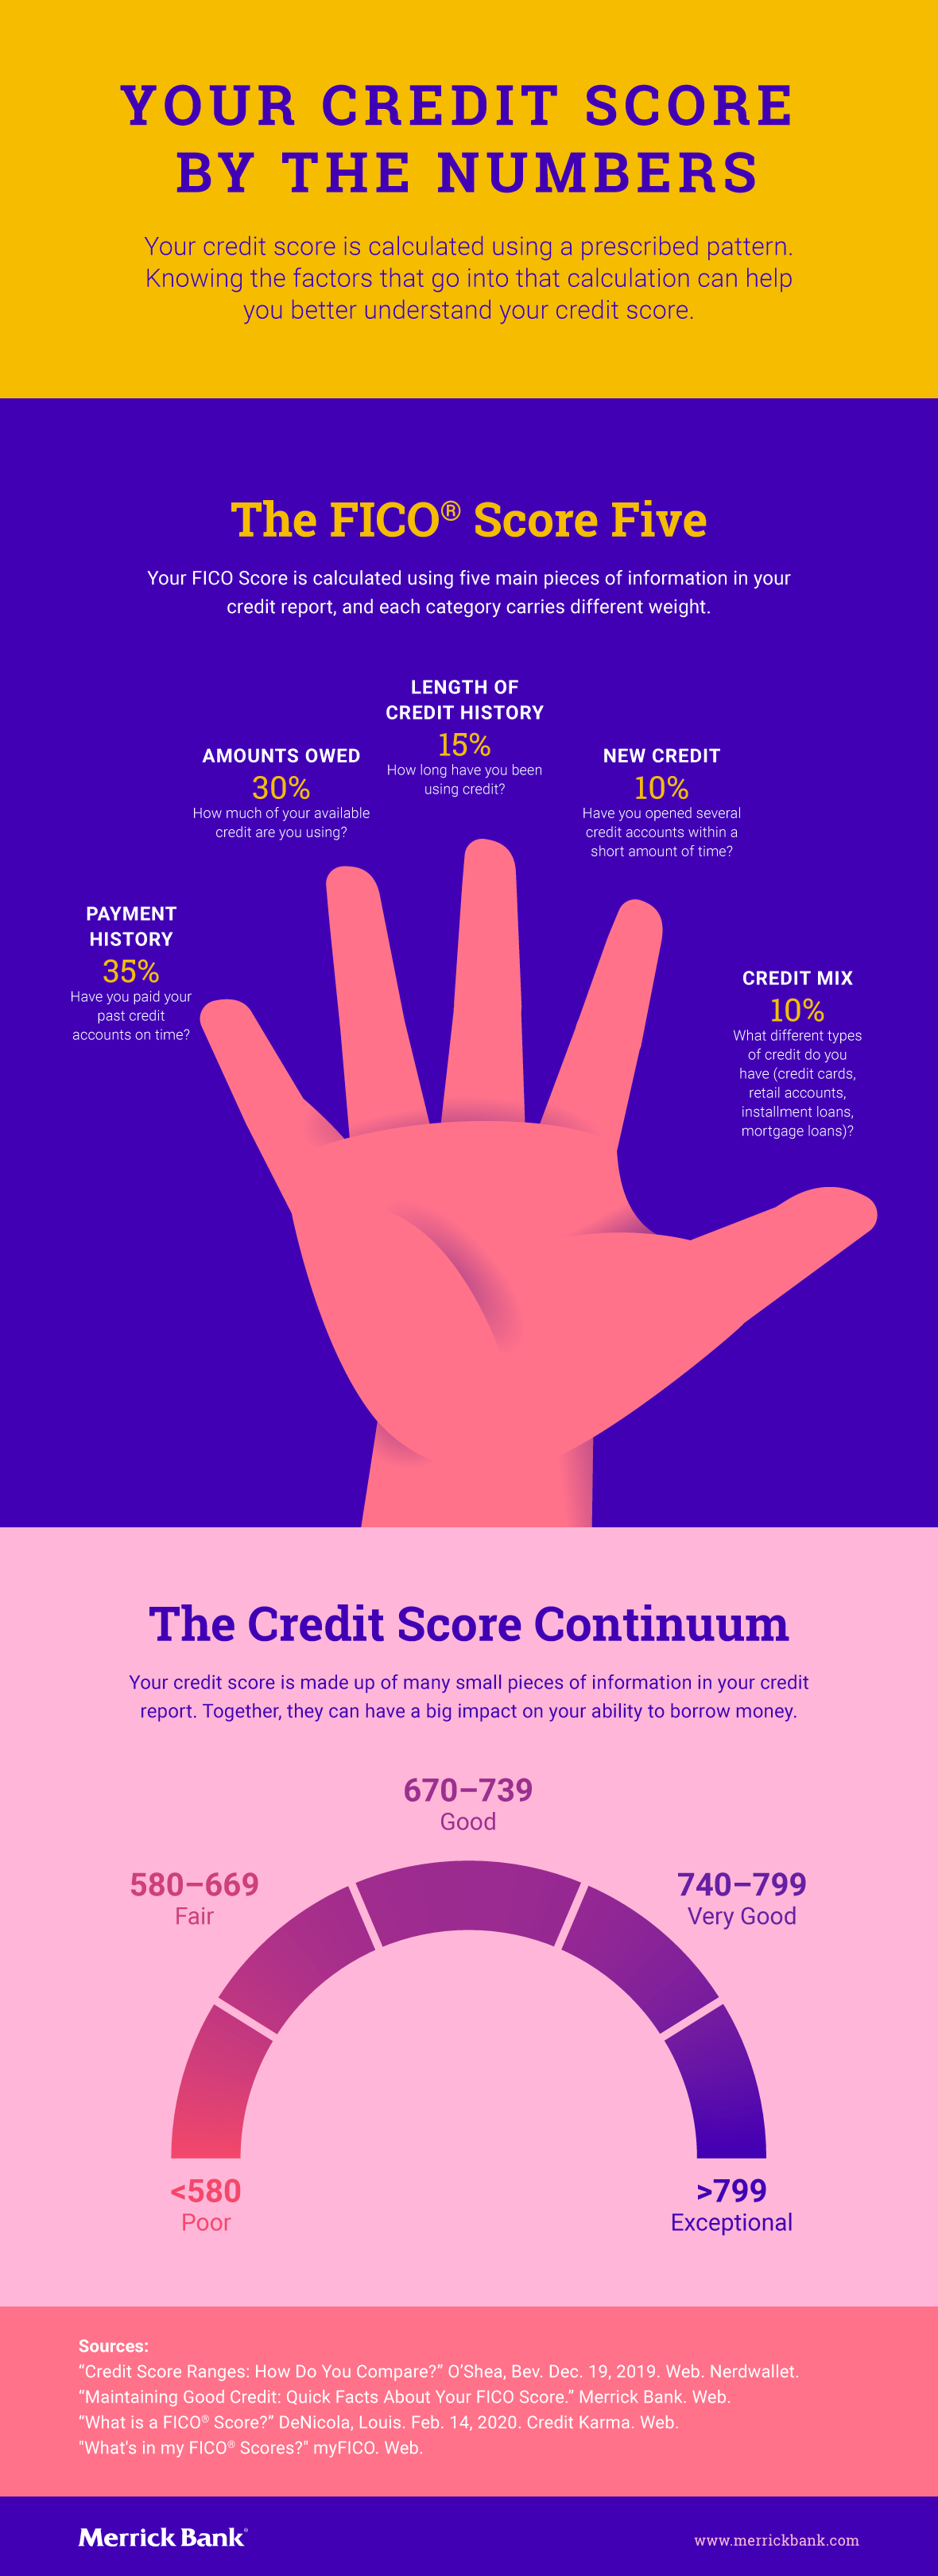 MER20-0049_Your-Credit-Score_Infographic_V5.png